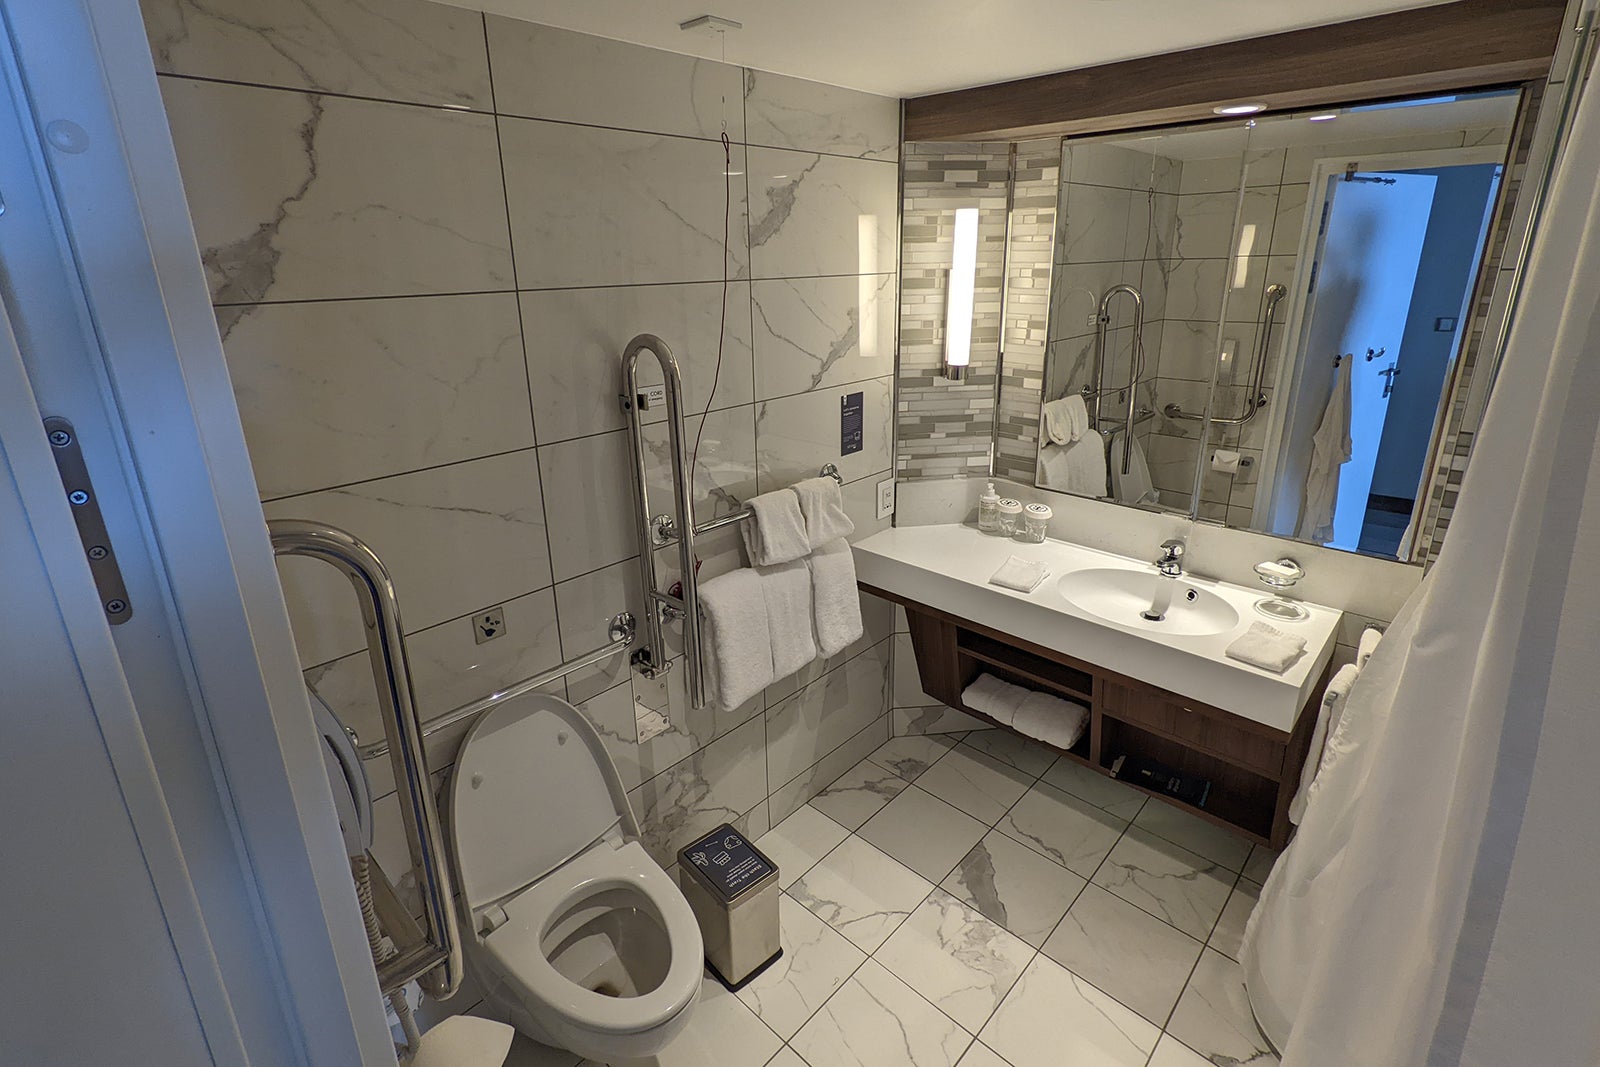 Accessible cruise ship bathroom with white tiles